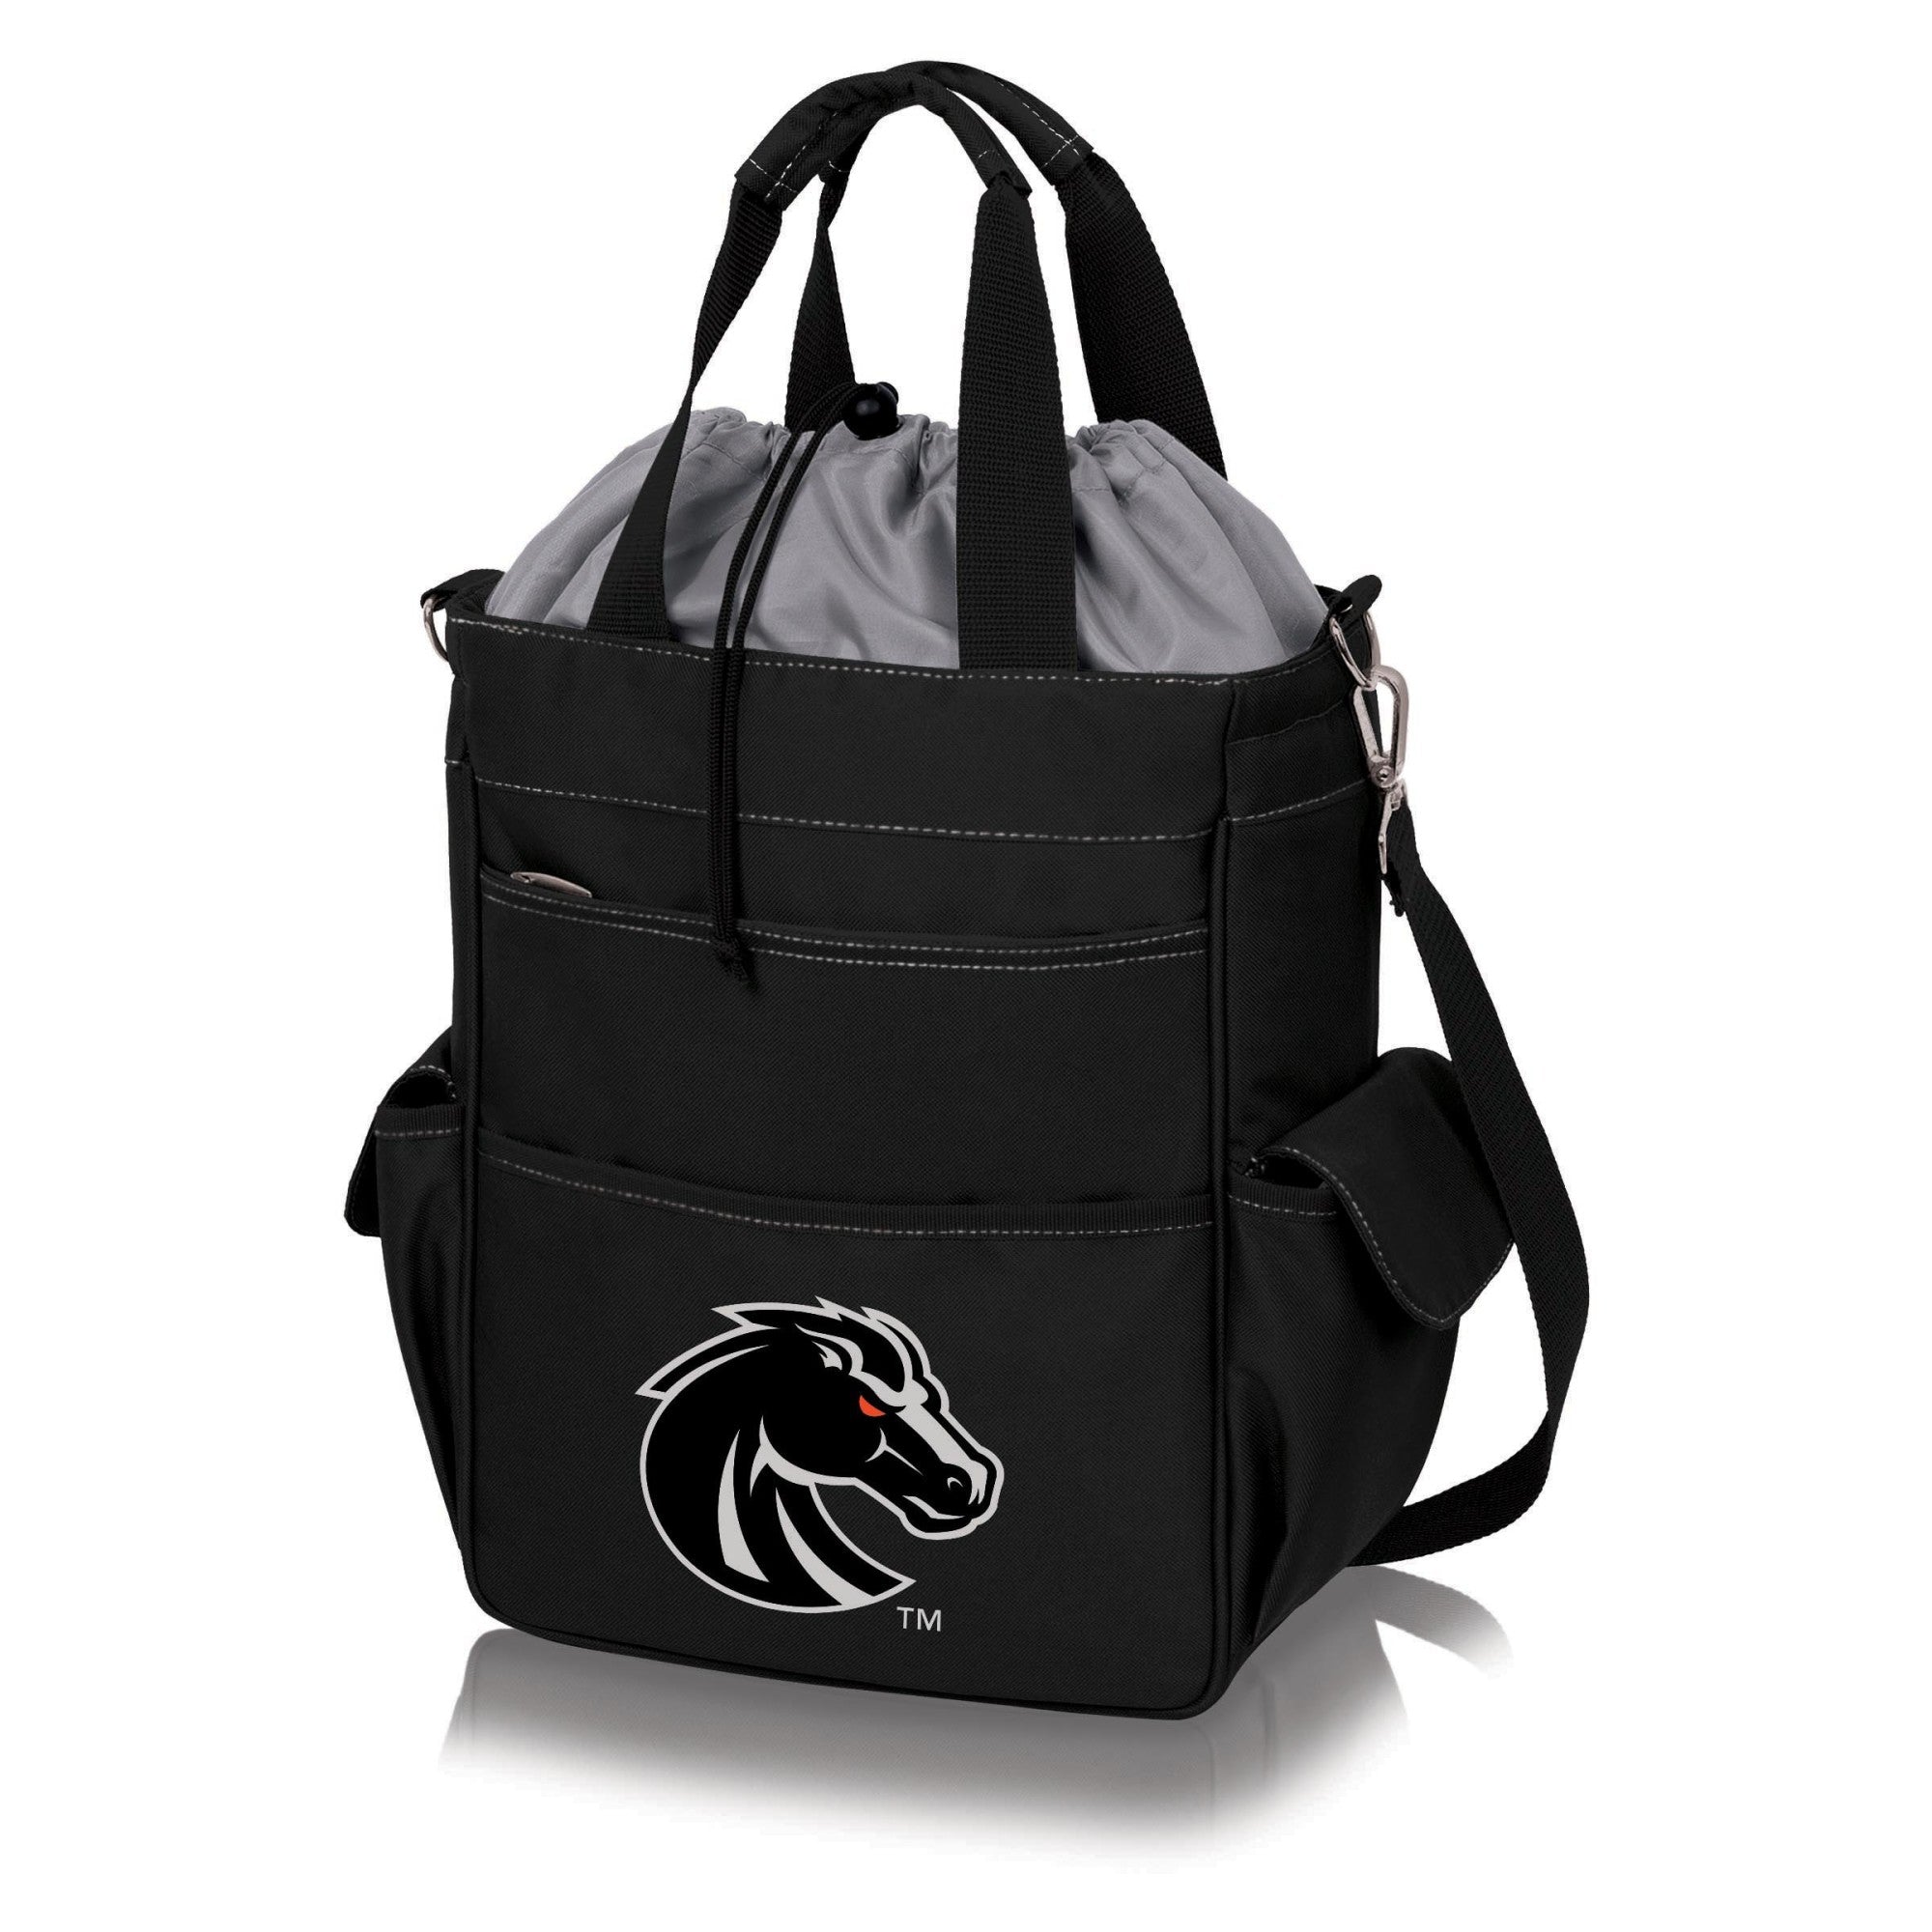 Boise State Broncos - Activo Cooler Tote Bag